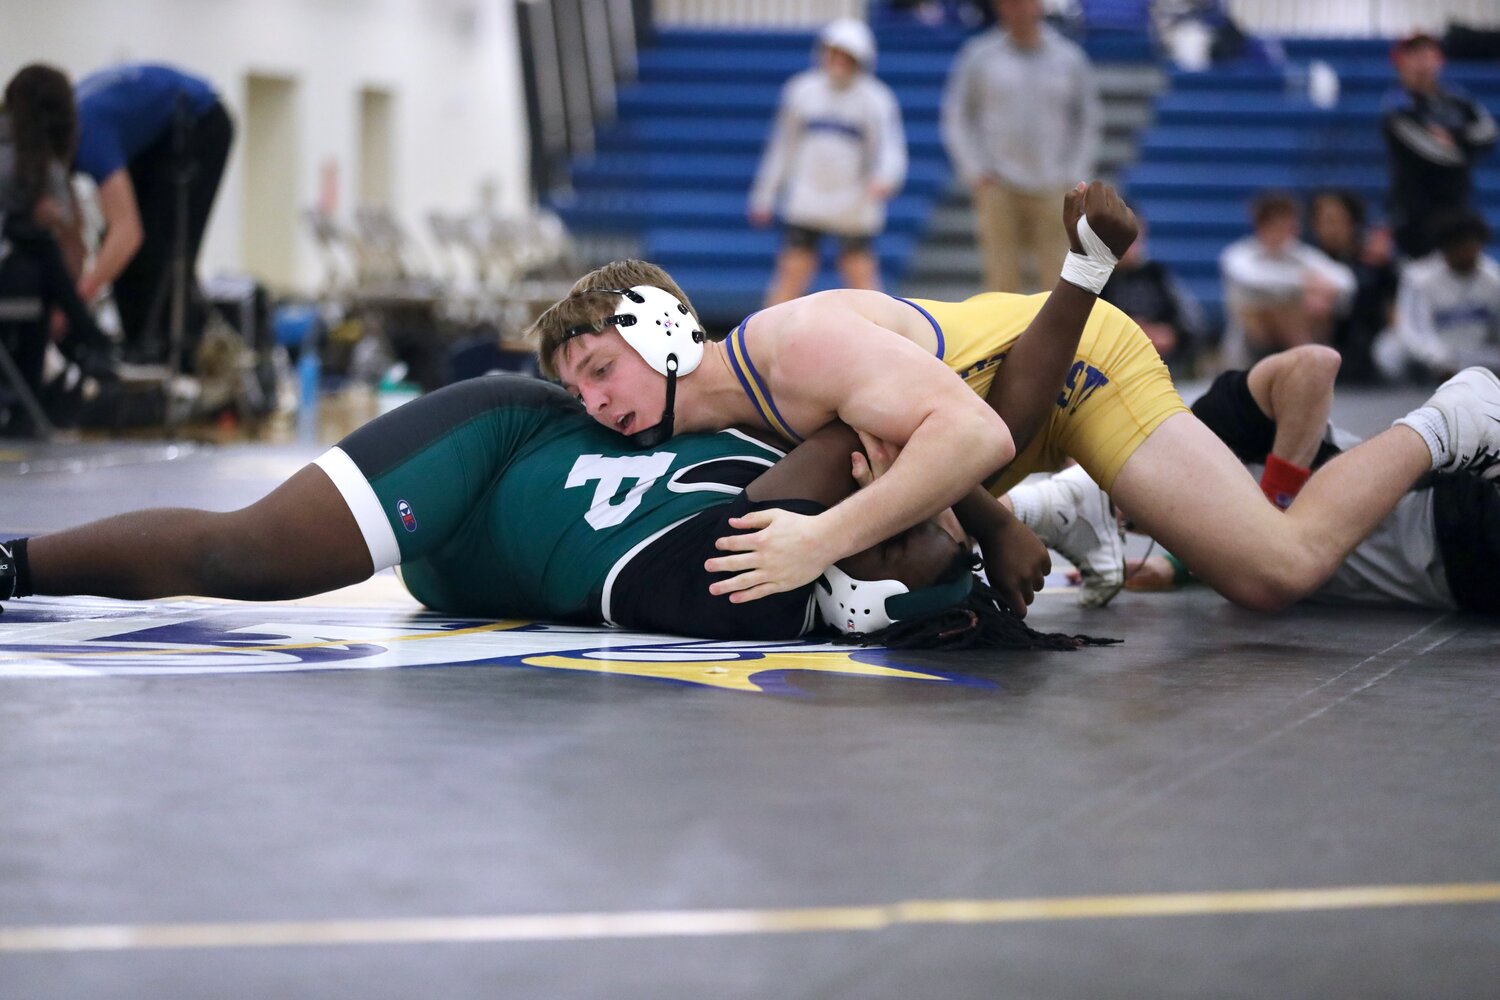 Derek Steinke continues to pile up pins. He wrestled against a Park opponent Friday night.